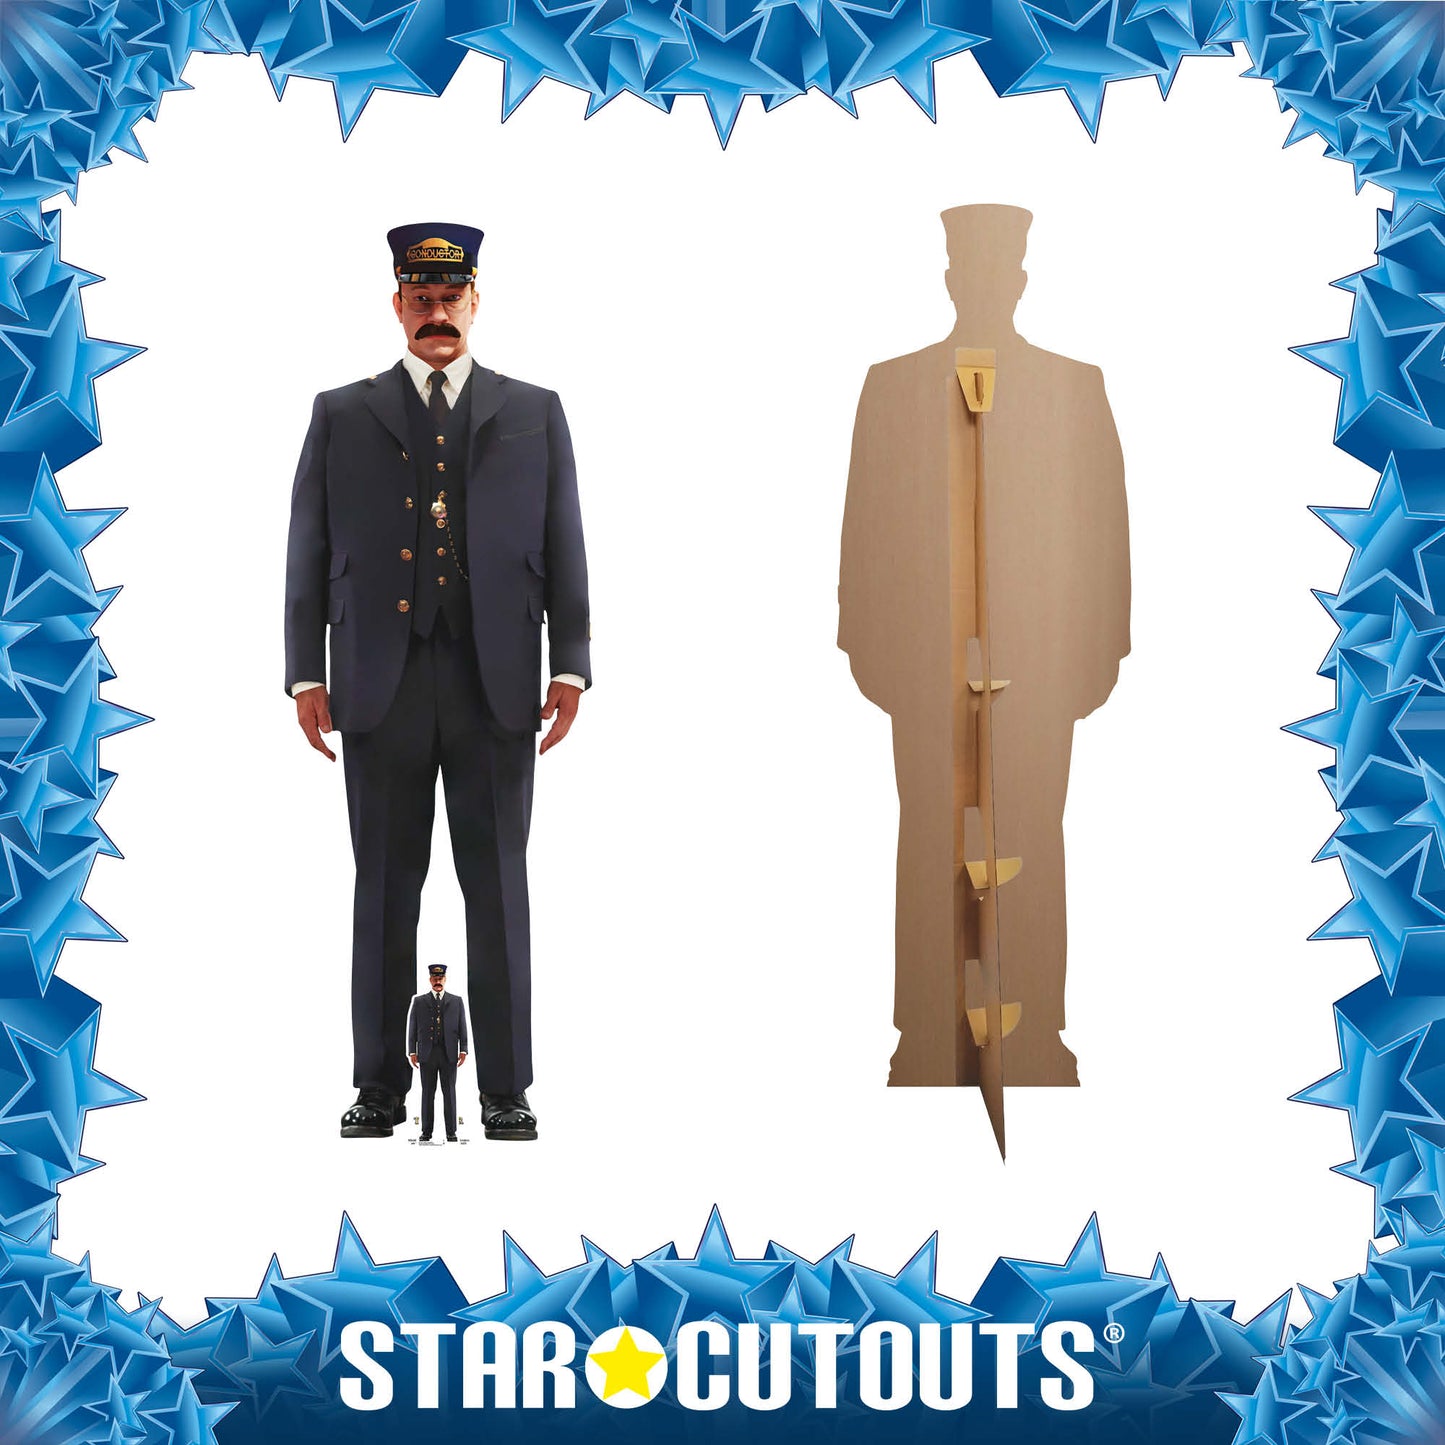 SC4379 Conductor Polar Express Cardboard Cut Out Height 184cm